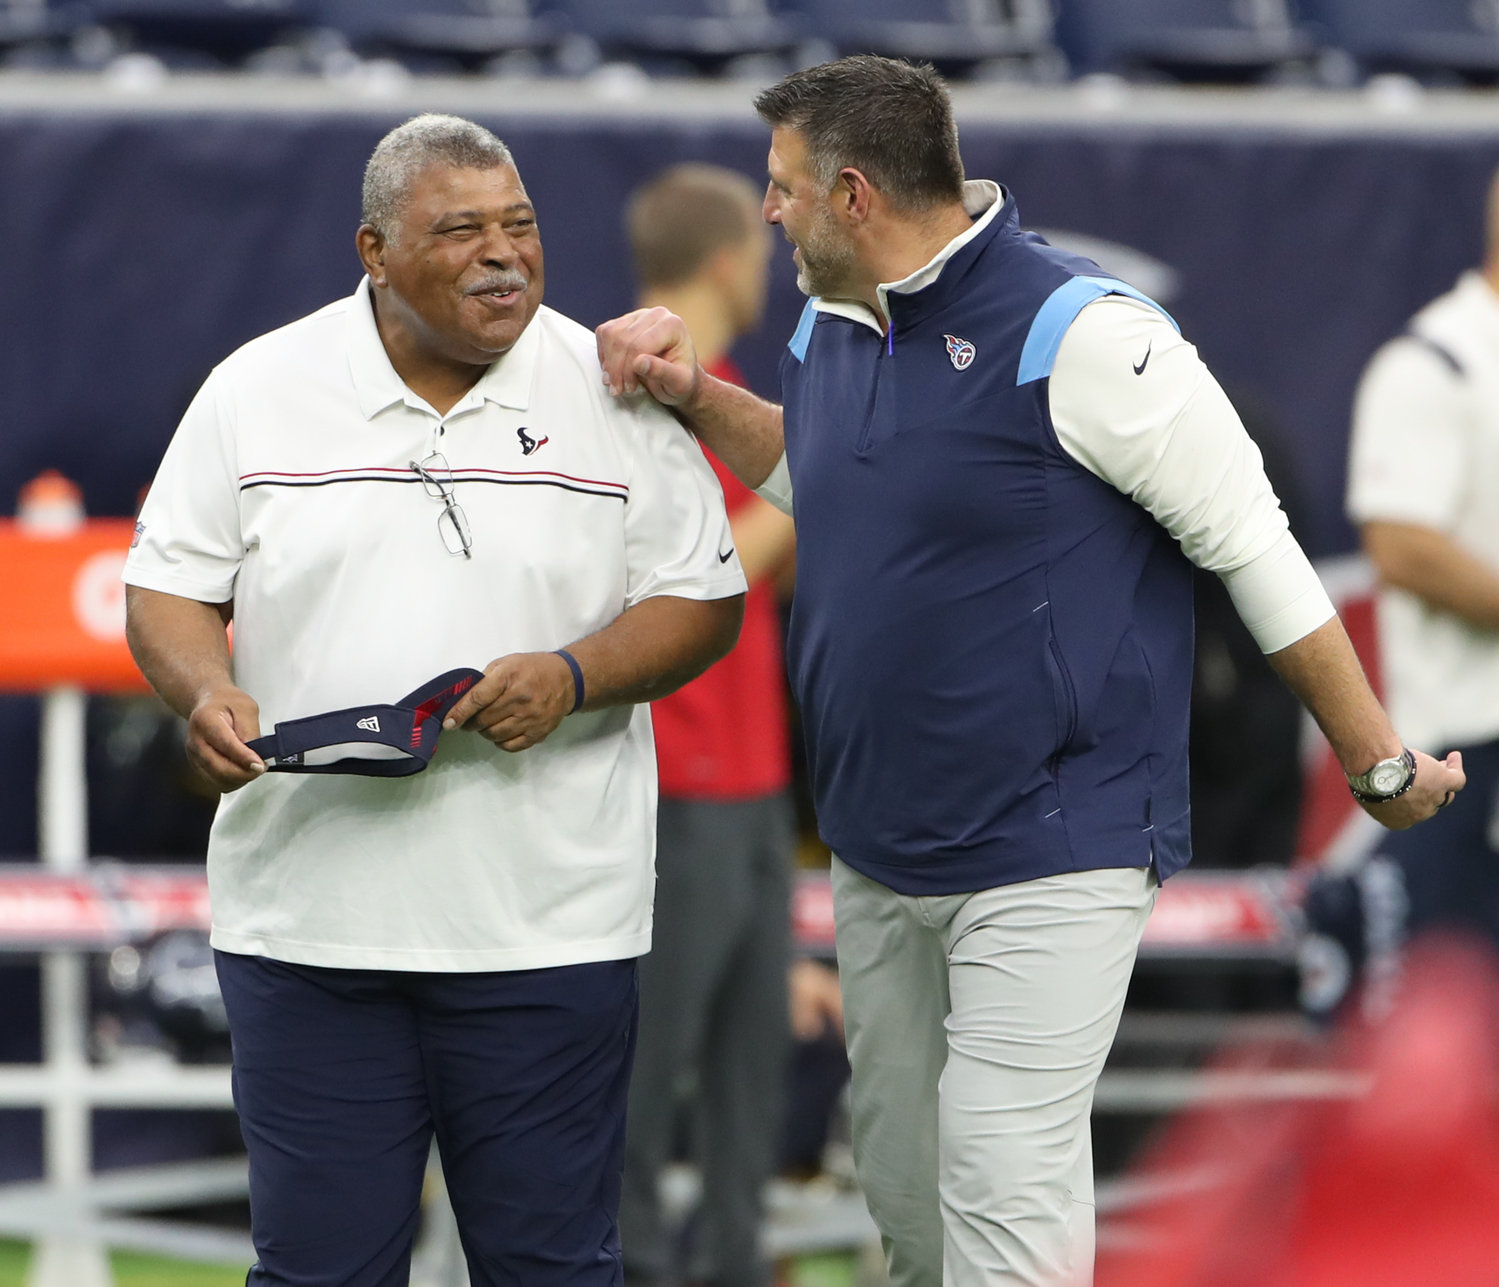 Houston Texans senior advisor for football operations Romeo Crennel talks with Tennessee Titans head coach Mike Vrabel before the start of an NFL game between the Texans and the Titans on Jan. 9, 2022 in Houston, Texas.